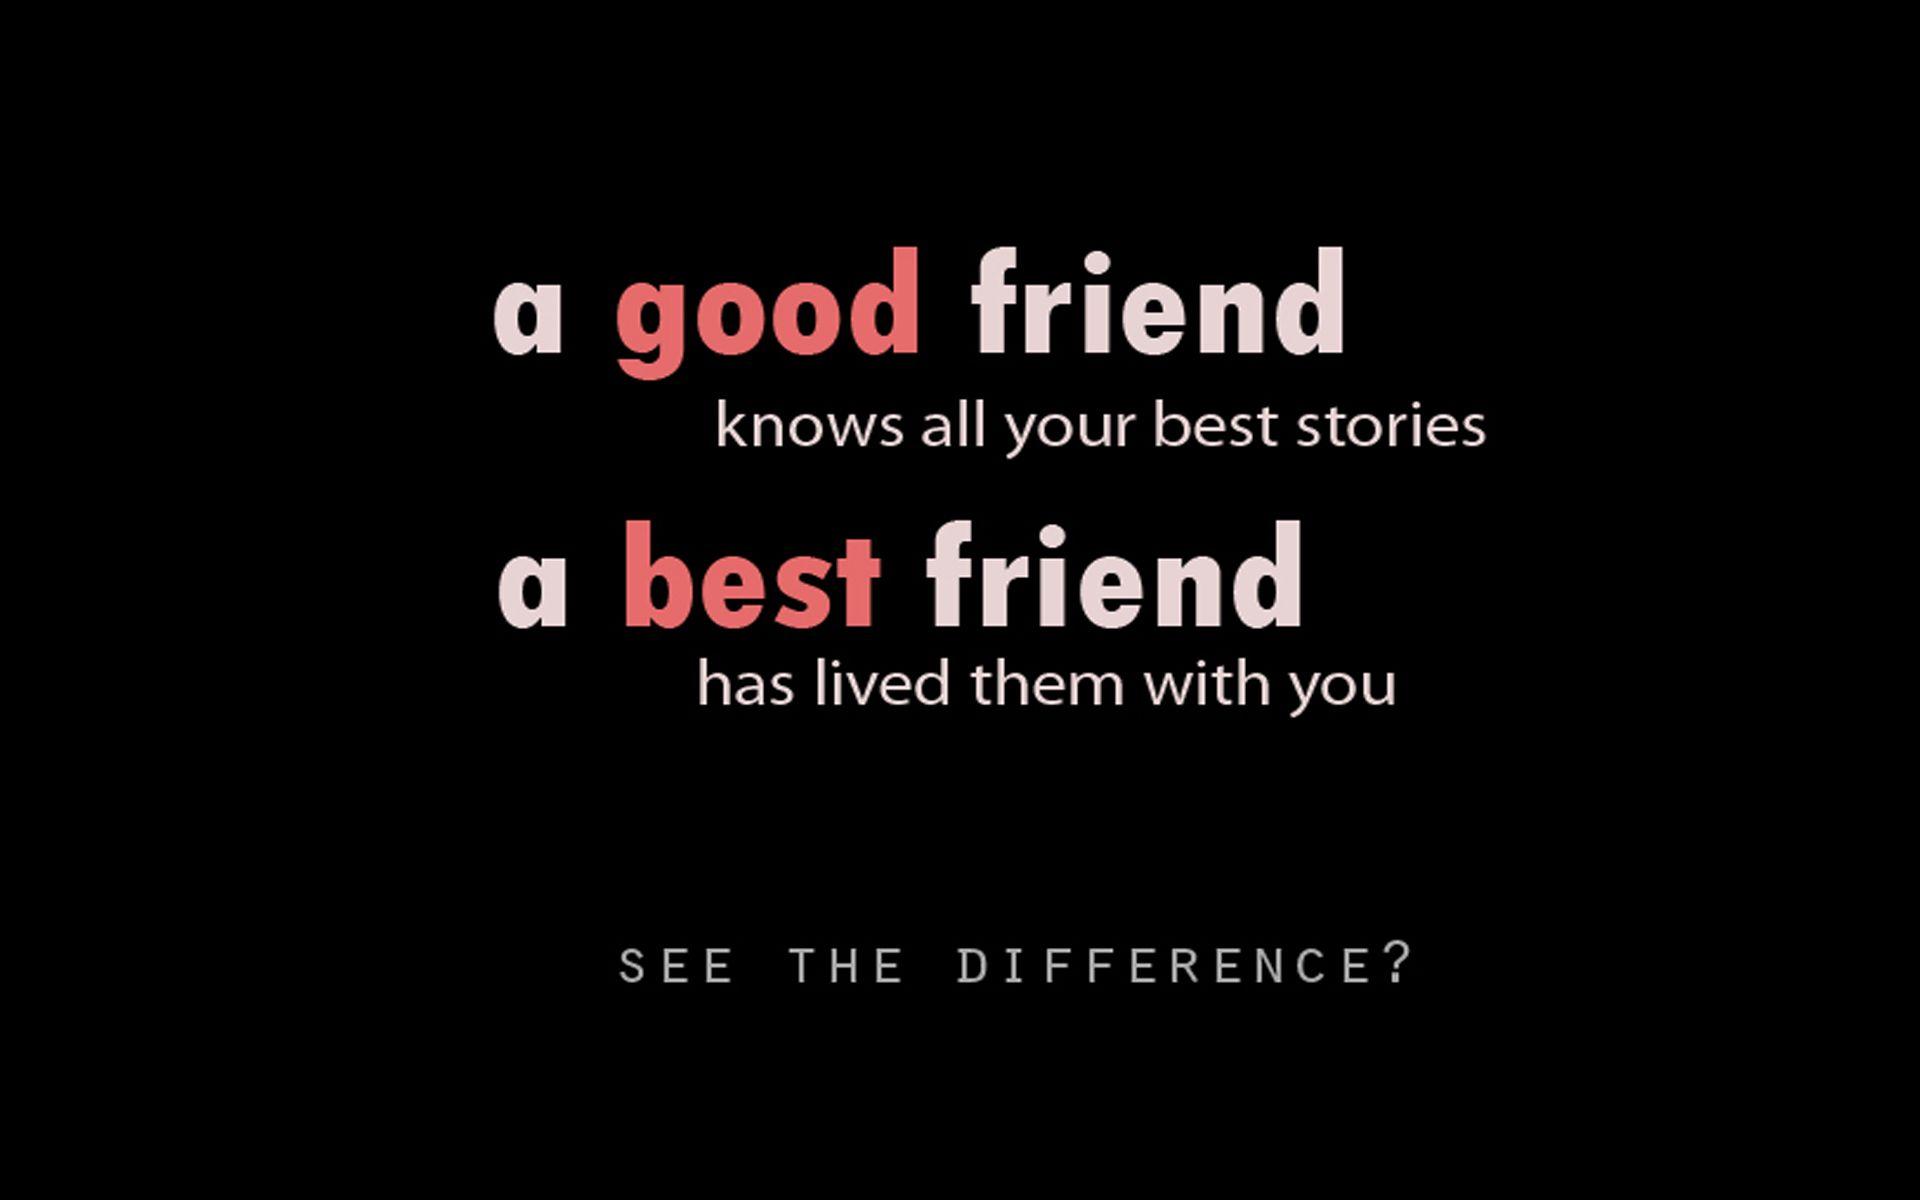 friendship quotes and sayings wallpaper